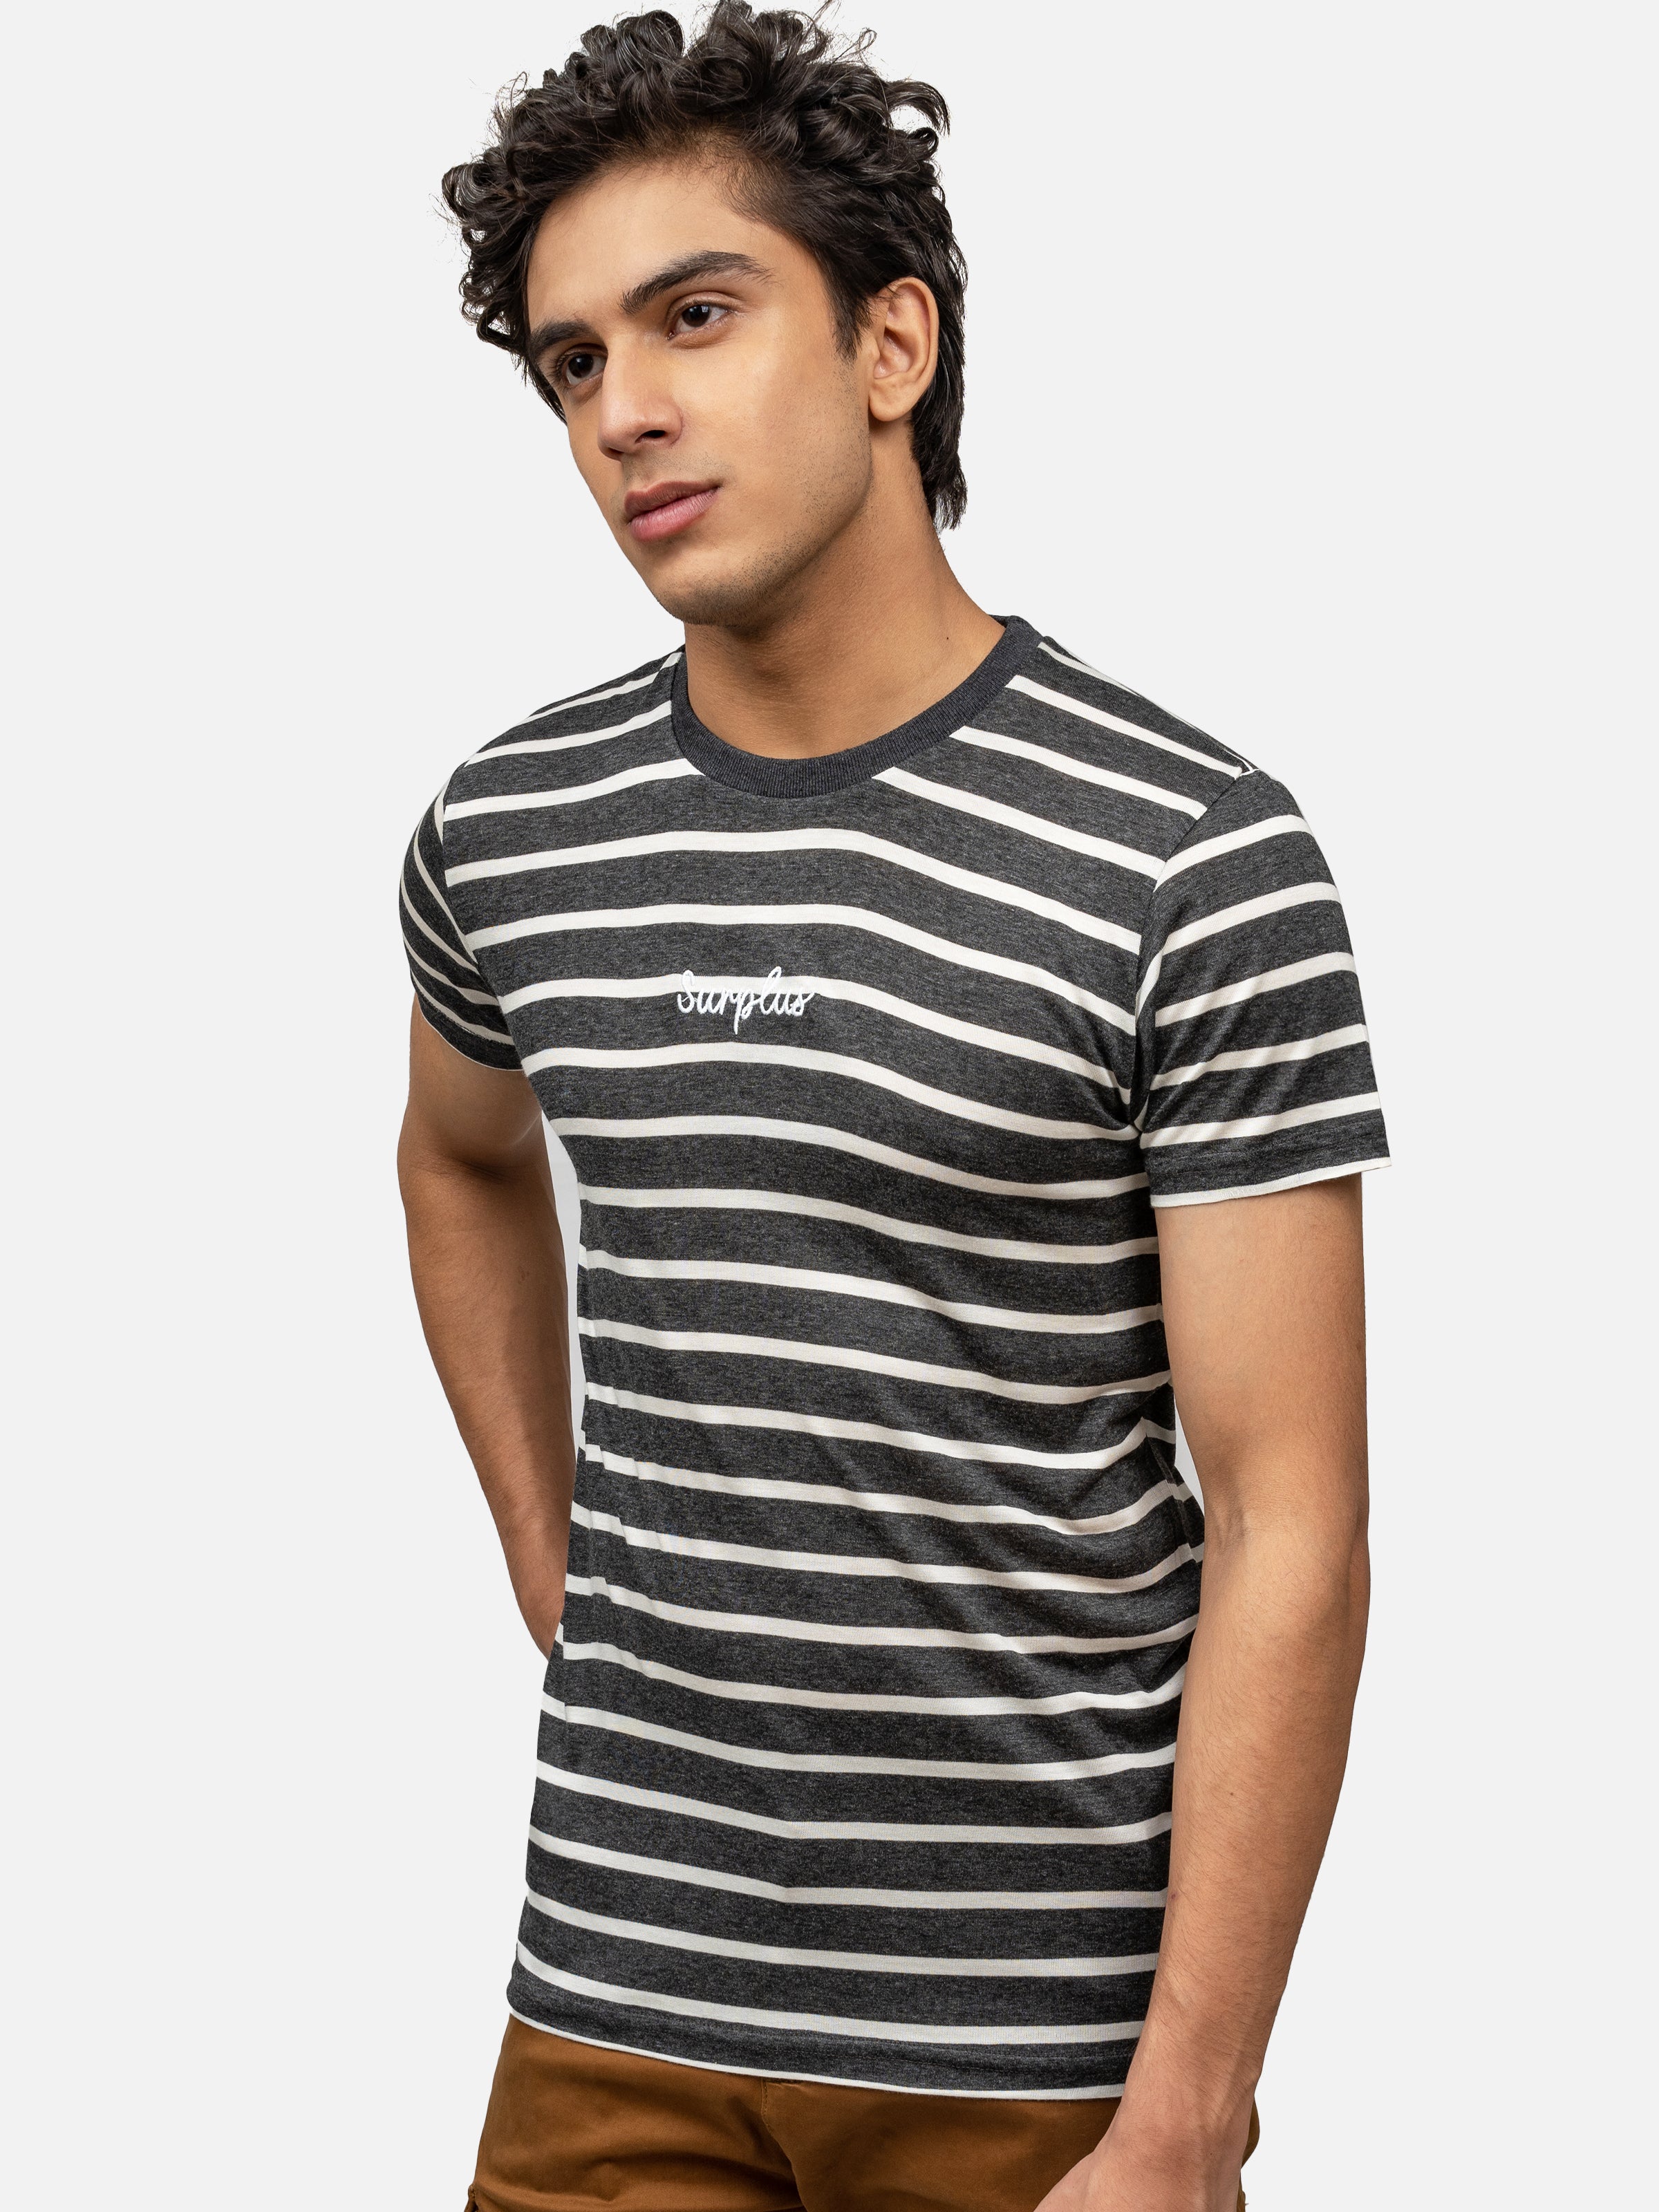 T SHIRT YARN DYED ROUND NECK CHARCOAL WHITE